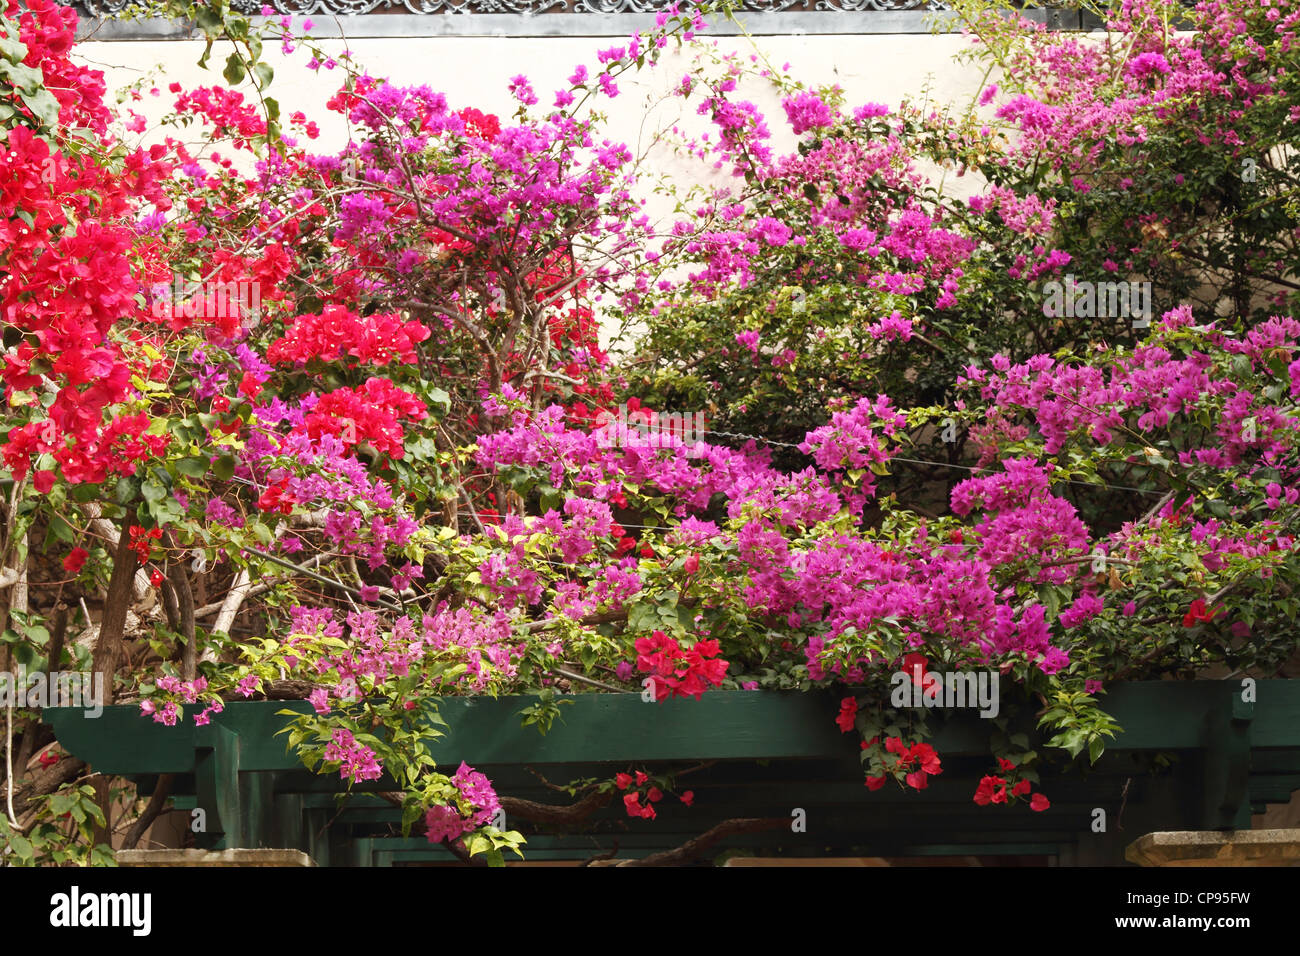 Red, purple and pink bougainvillea climbing on a wood trellis Stock Photo -  Alamy